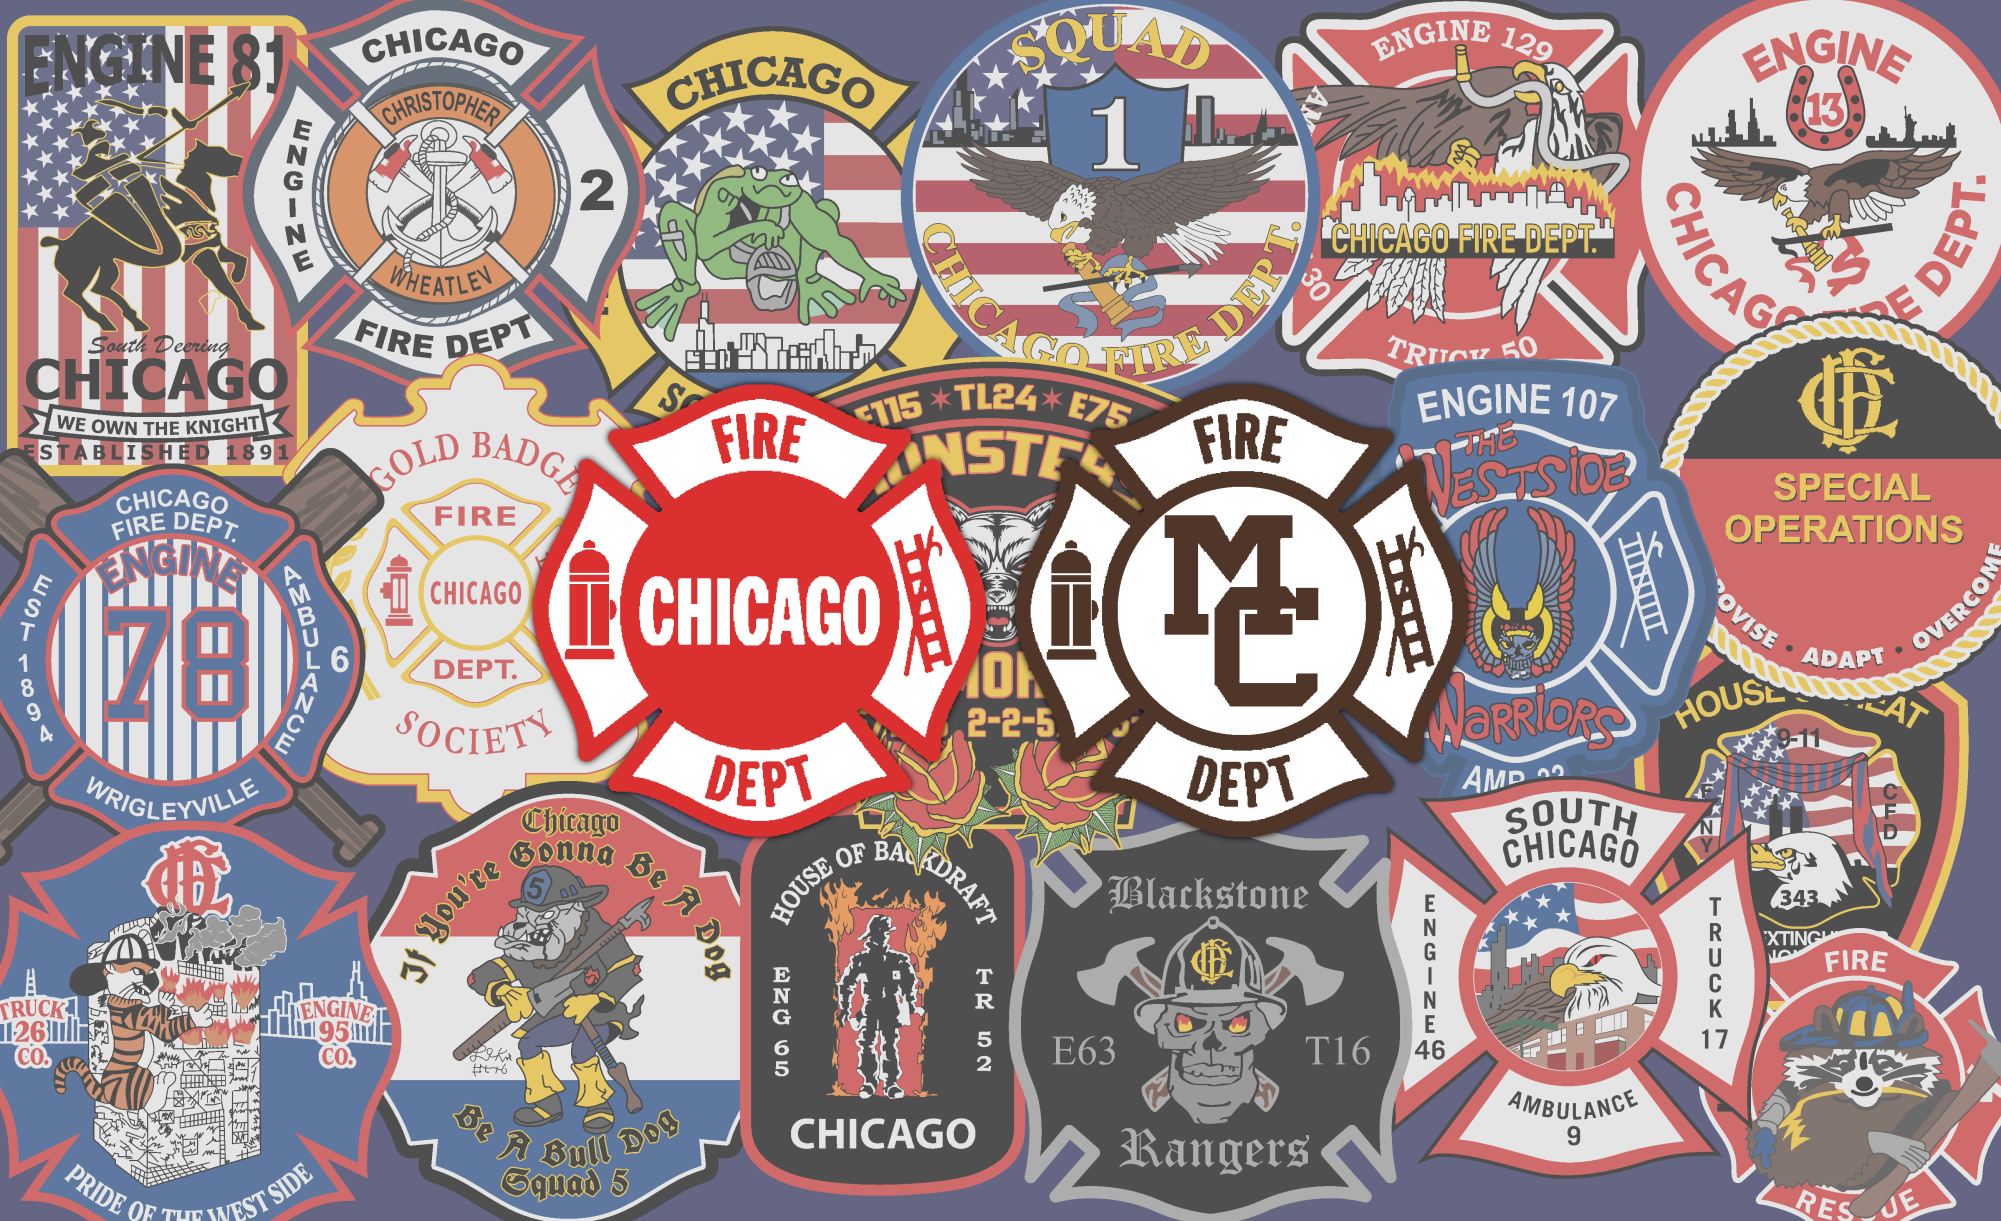 As long as MC has been open, alumni have been there around the City of Chicago to save lives.